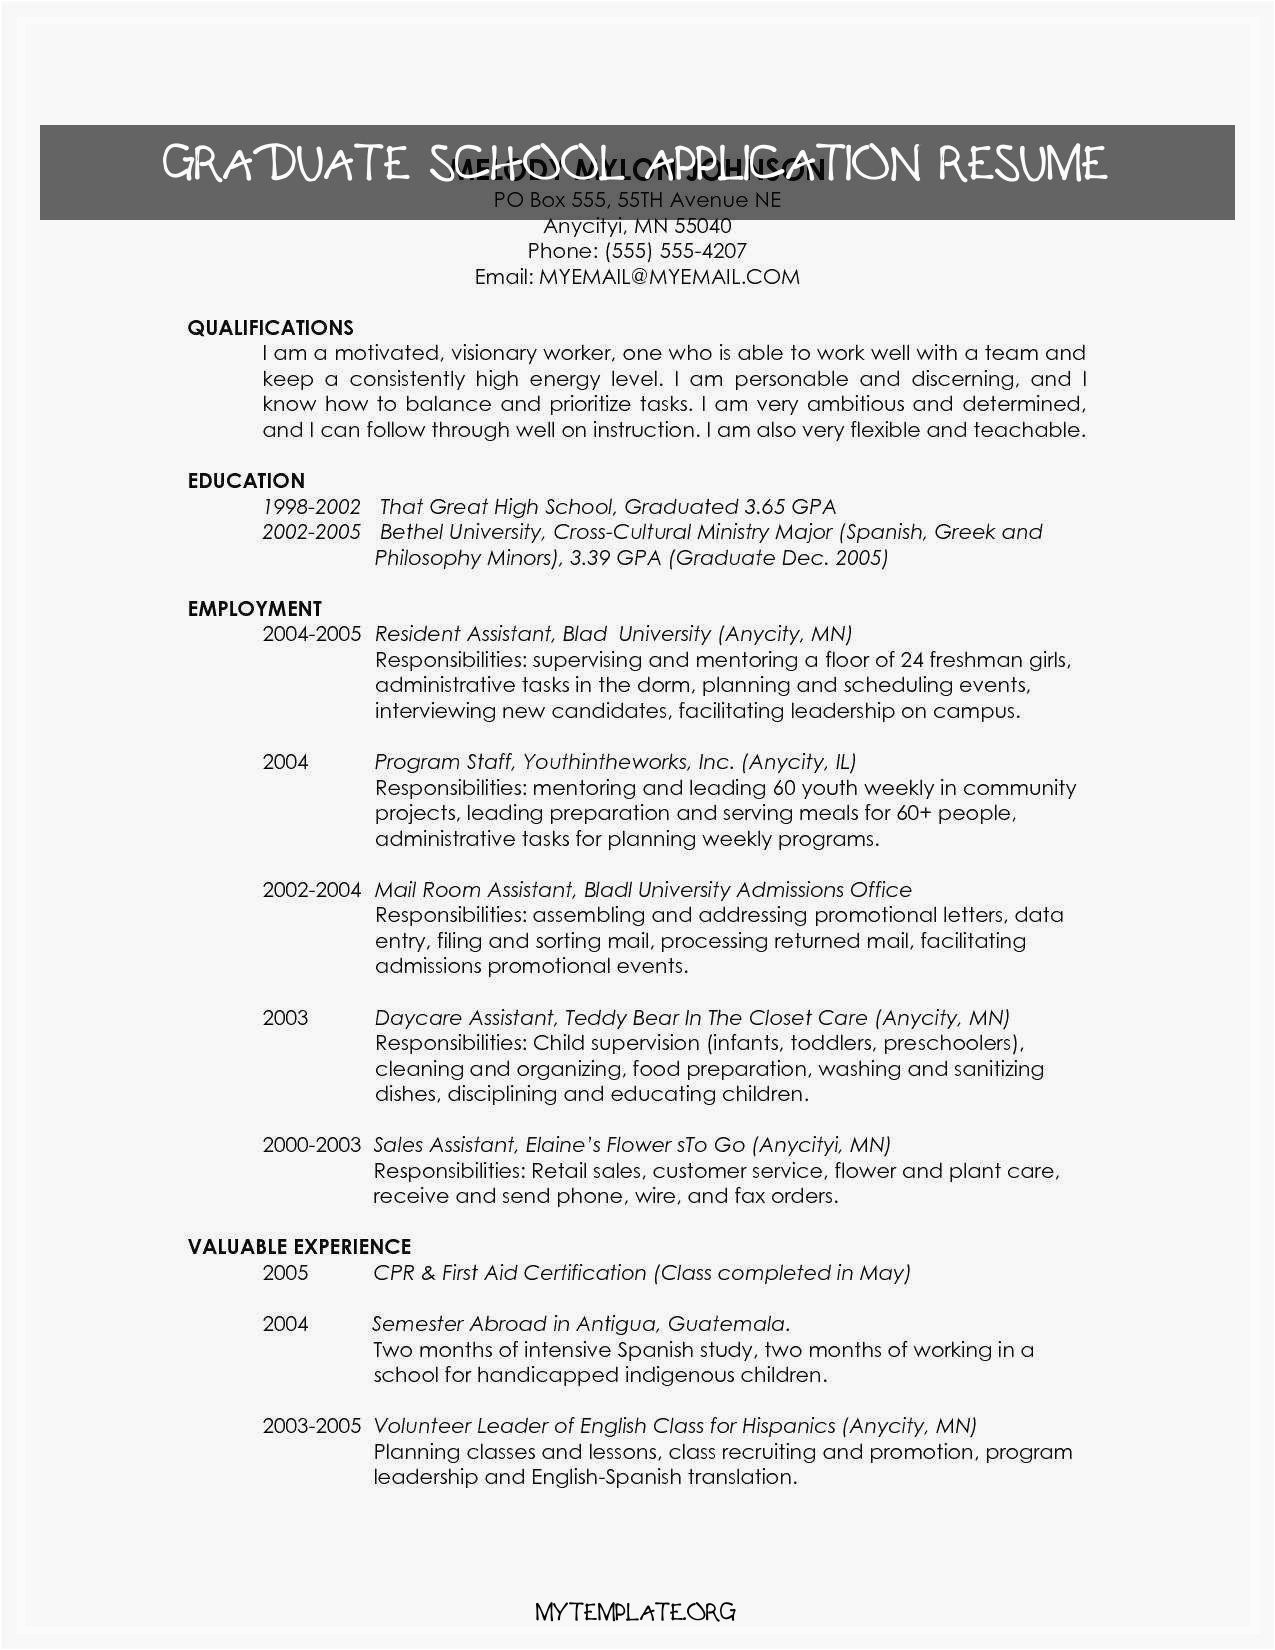 resume template for masters application